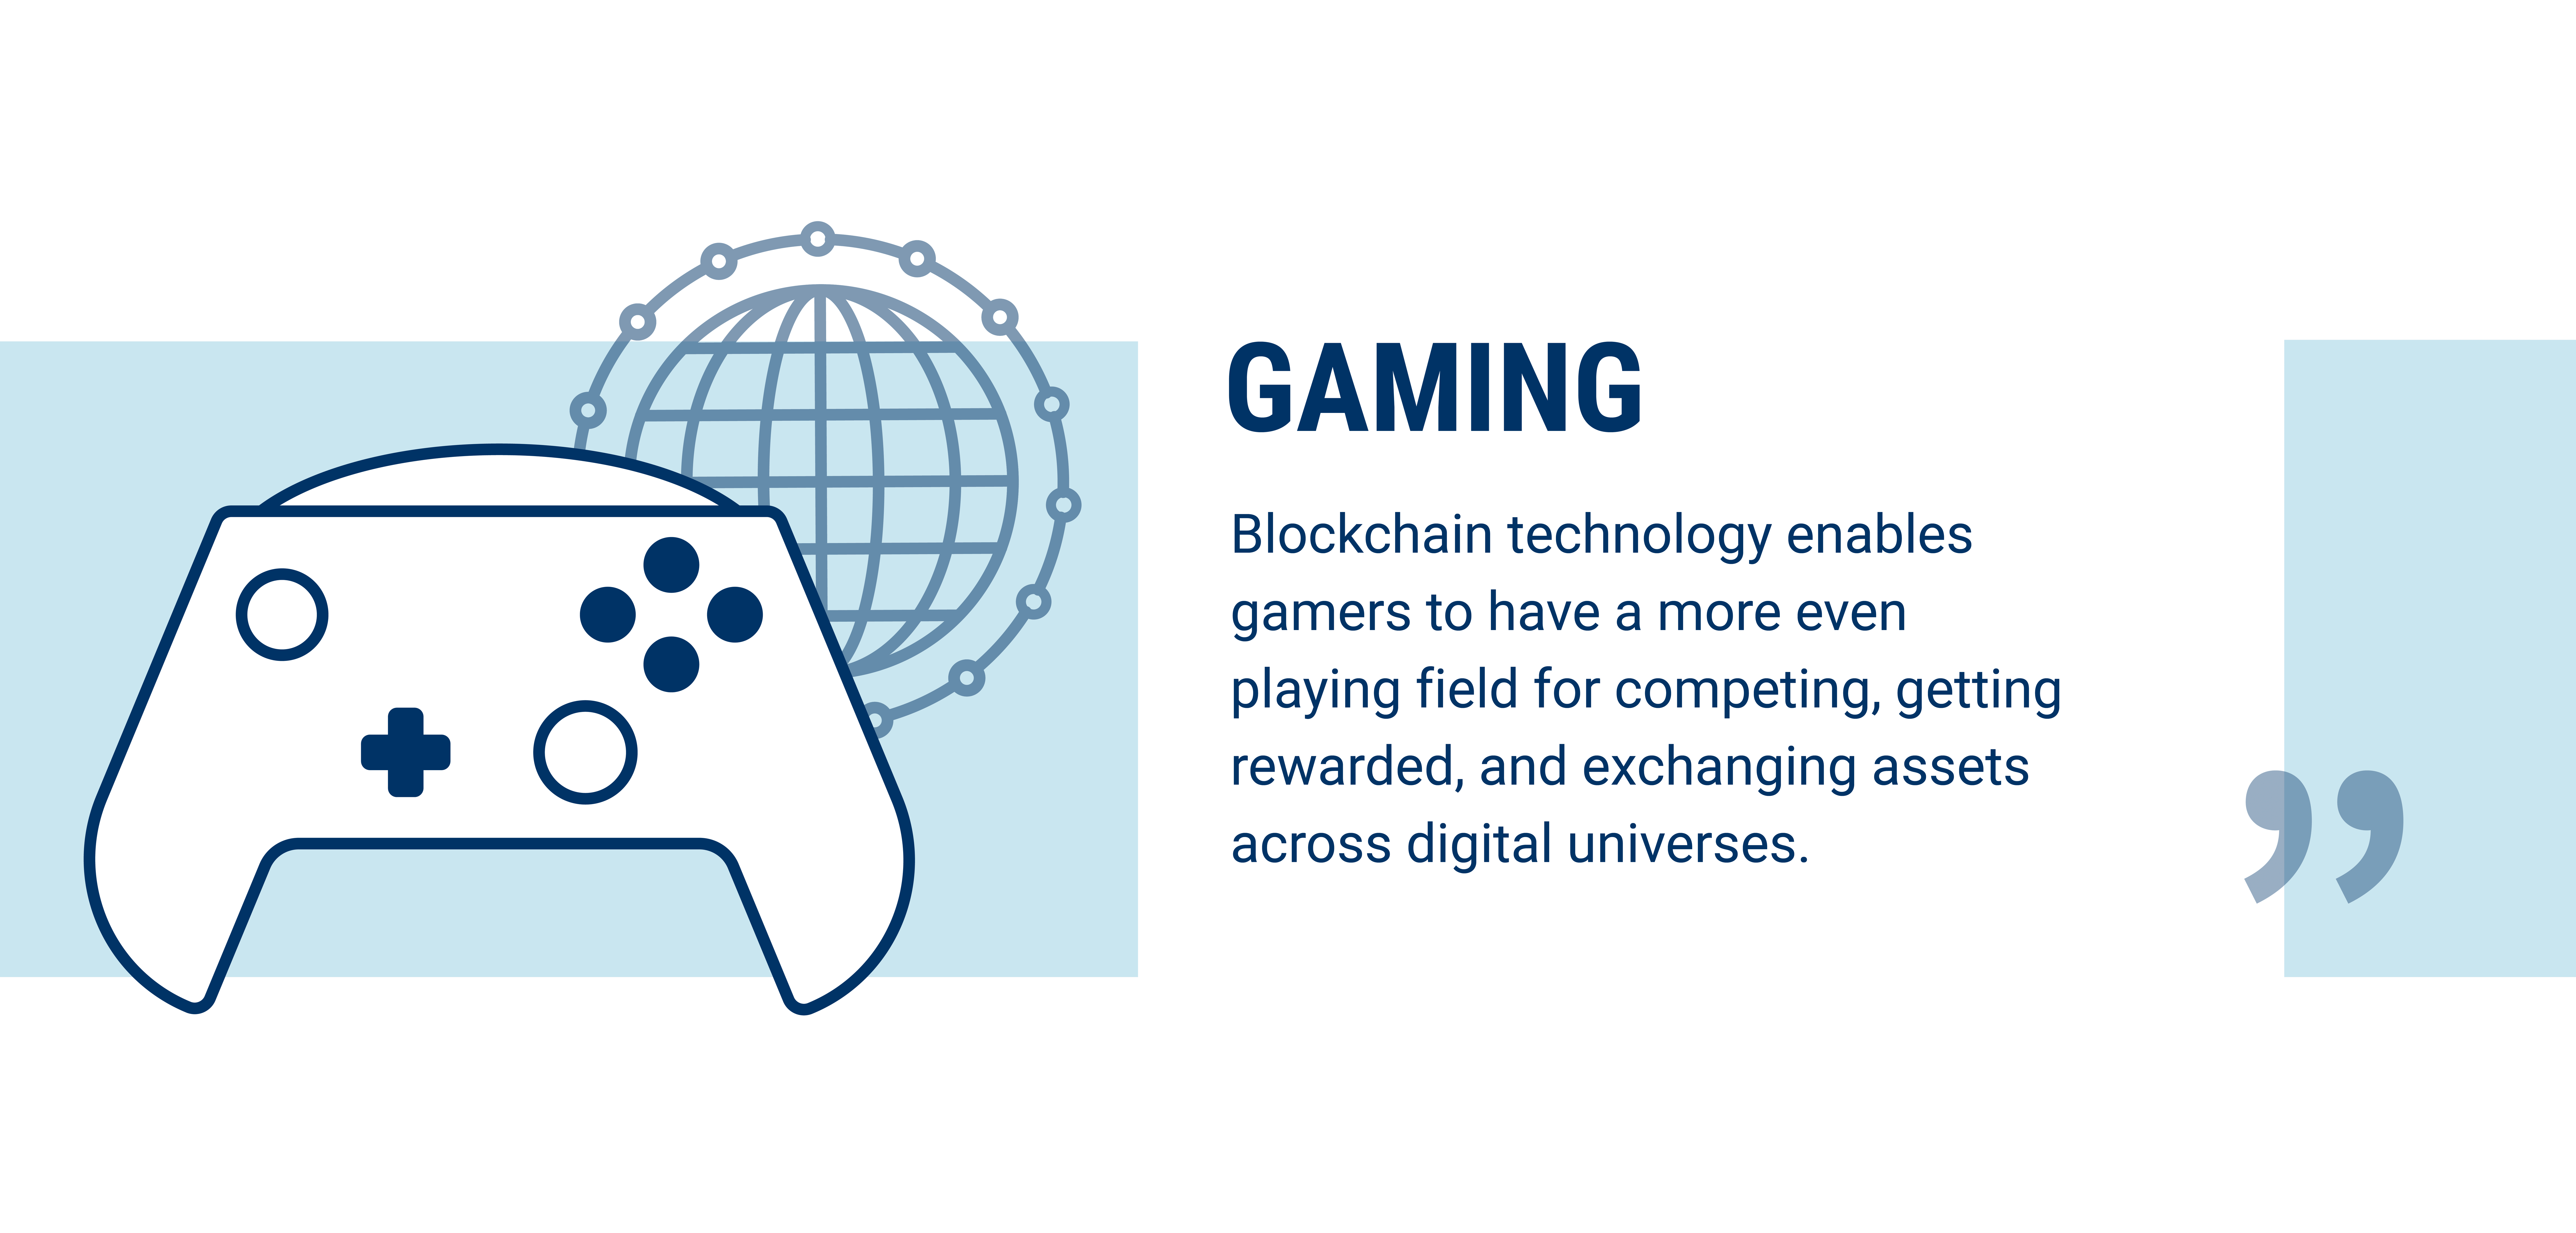 Gaming is being disrupted by blockchain technology